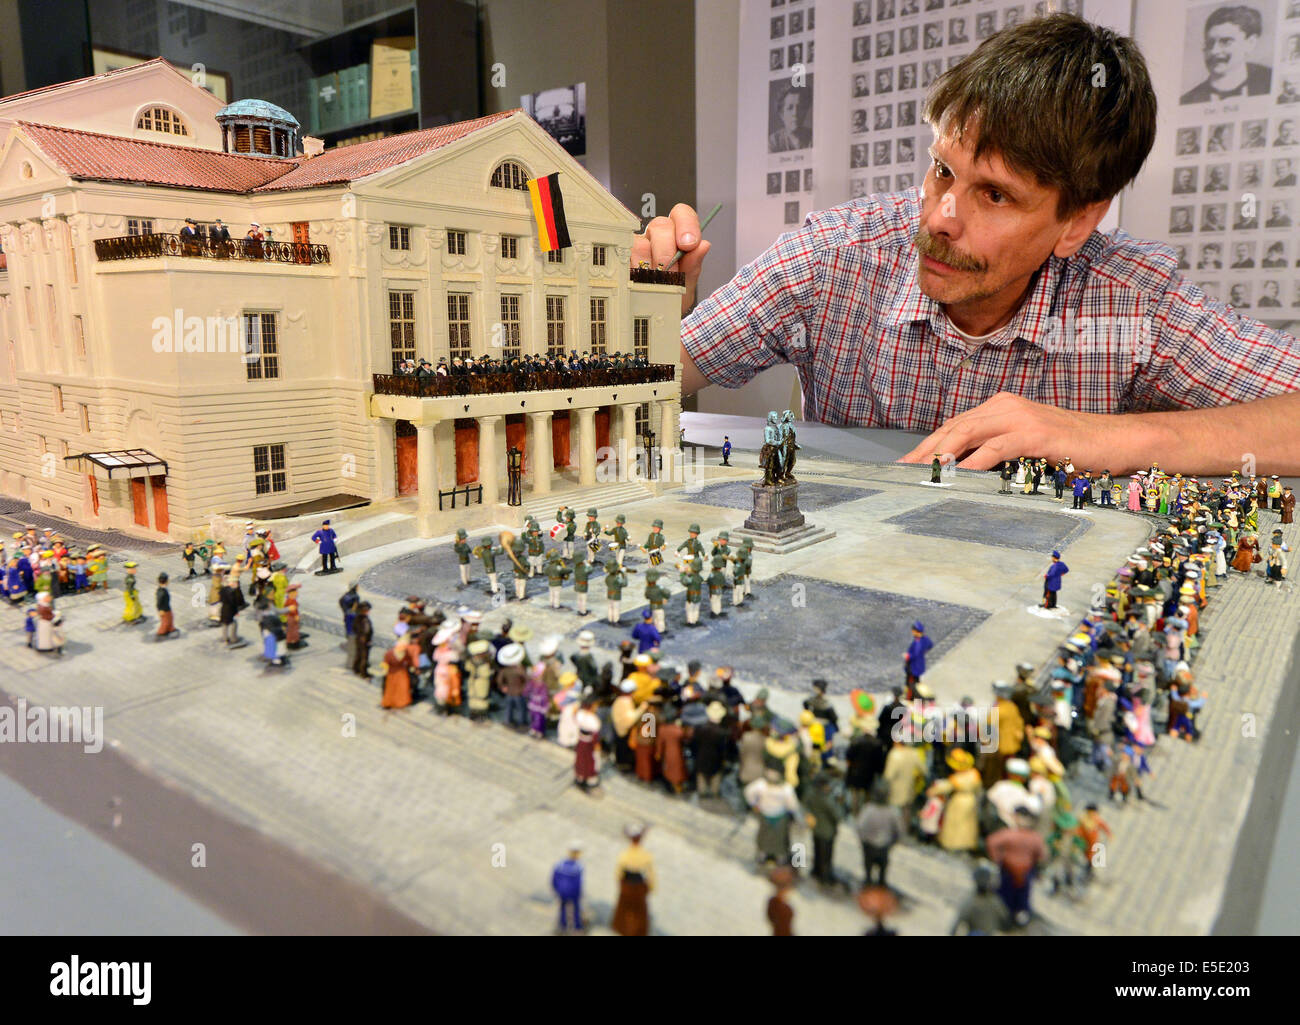 Weimar, Germany. 29th July, 2014. Plasterer Mathias Moehl works at a model of the German National Theater Weimar in the exhibition 'Democracy from Weimar. The National Assembly of 1919' in the Municipal Museum in Weimar, Germany, 29 July 2014. It shows the historic situation on Theaterplatz on 21 August 1919 after the swearing-in of Reich President Friedrich Ebert. Photo: MARTIN SCHUTT/dpa/Alamy Live News Stock Photo